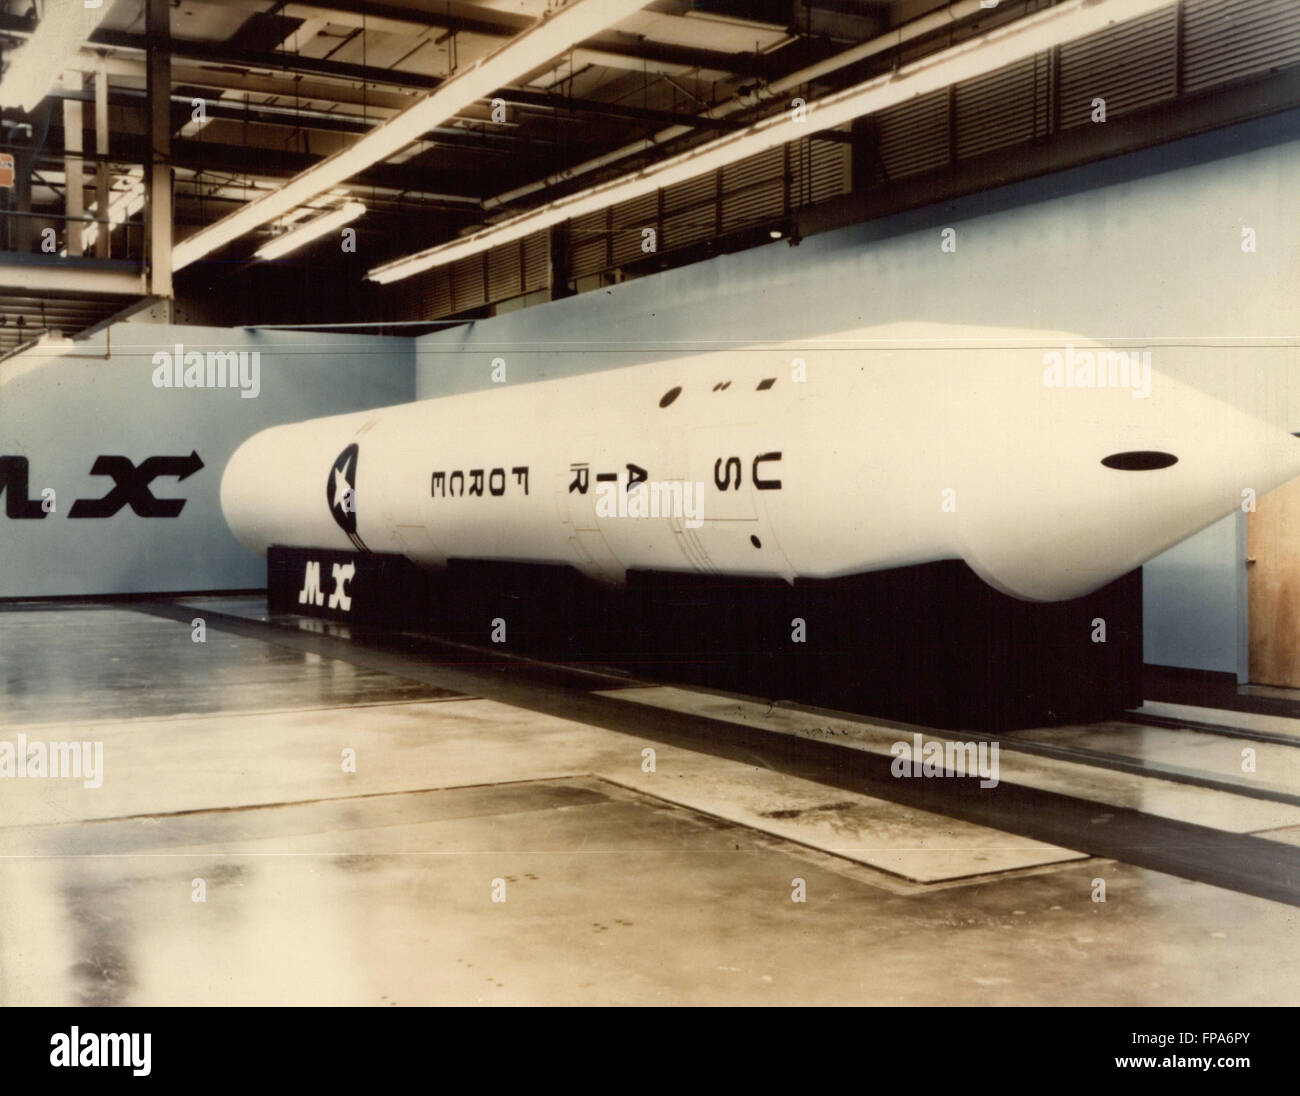 1989 - Miss/Rocks-MX Mockup: M-X ICBM - This is a full-scale mockup of the new mobile M-X intercontinental ballistic missile (ICBM) being developed by the U.S.Air Force. Major M-X contractors include: Thiokol Corp. flags , Aerojet General Corp. (Stage 2), Hercules, Inc. (Stage 3), Rockwell International Corp. (Stage 4, flight computer, guidance and control system integrator) and Martin-Marietta Corp. (Assembly, Test and Systems Support). First M-X flight test will be in 1983 with initial operational capability (ten missiles) in 1986 and full operational capability (200 missiles) in 1989. (Cre Stock Photo